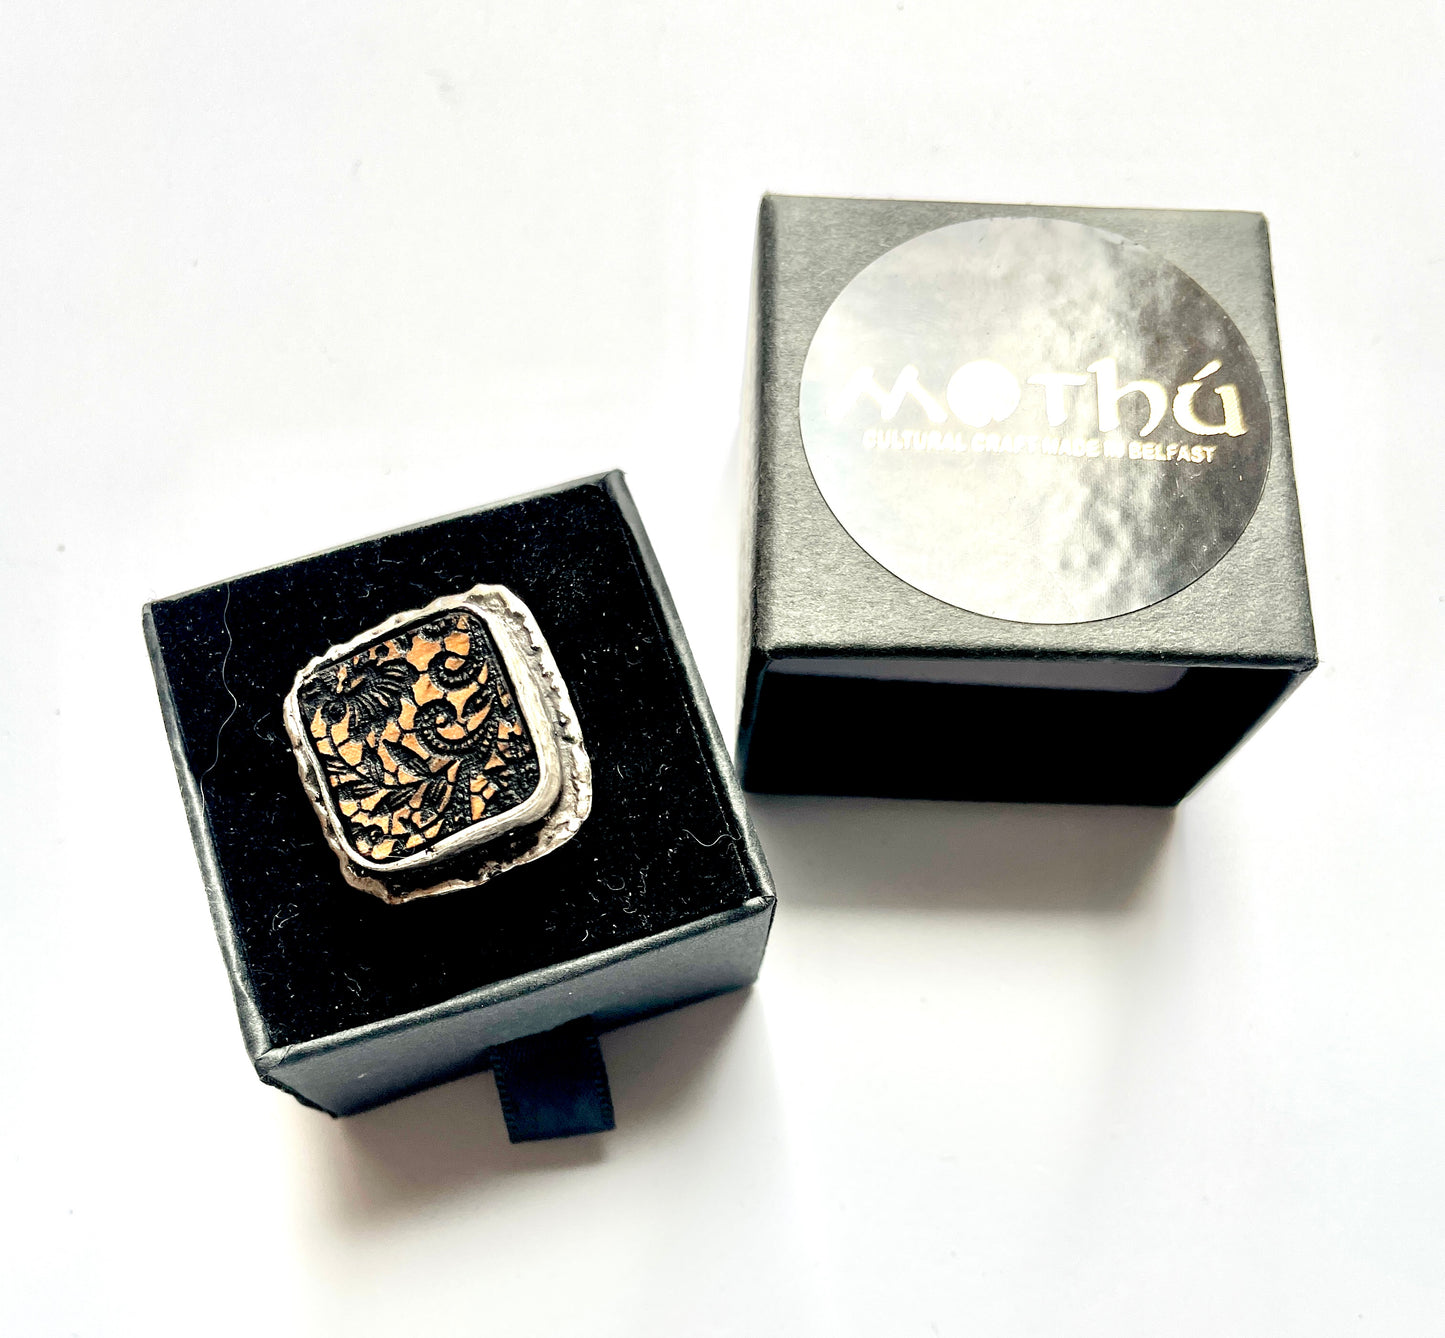 Silver plated engraved & hand painted wood,Etched lace pattern ring, one size, 2.5 cm x 2.5cm